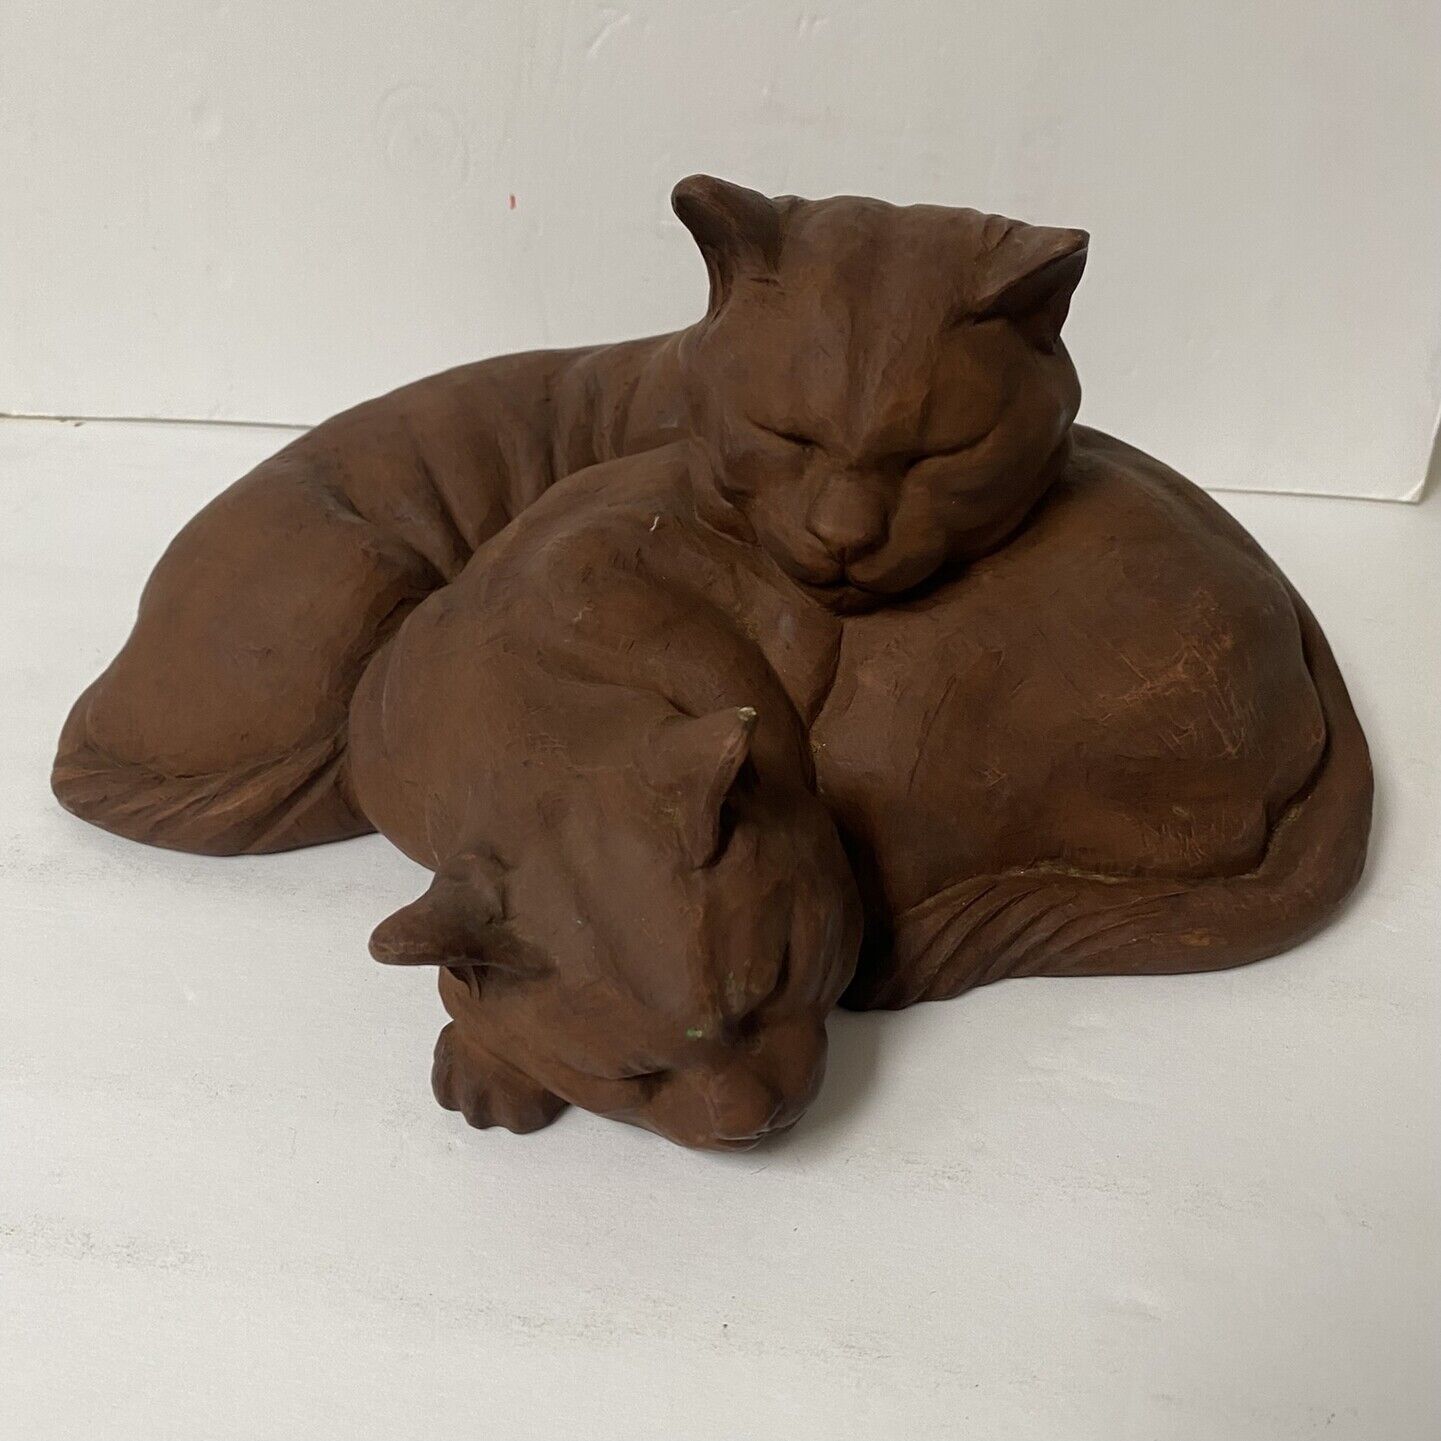 Red Mill Brown Curled Cat Sculpture Figurine Vintage